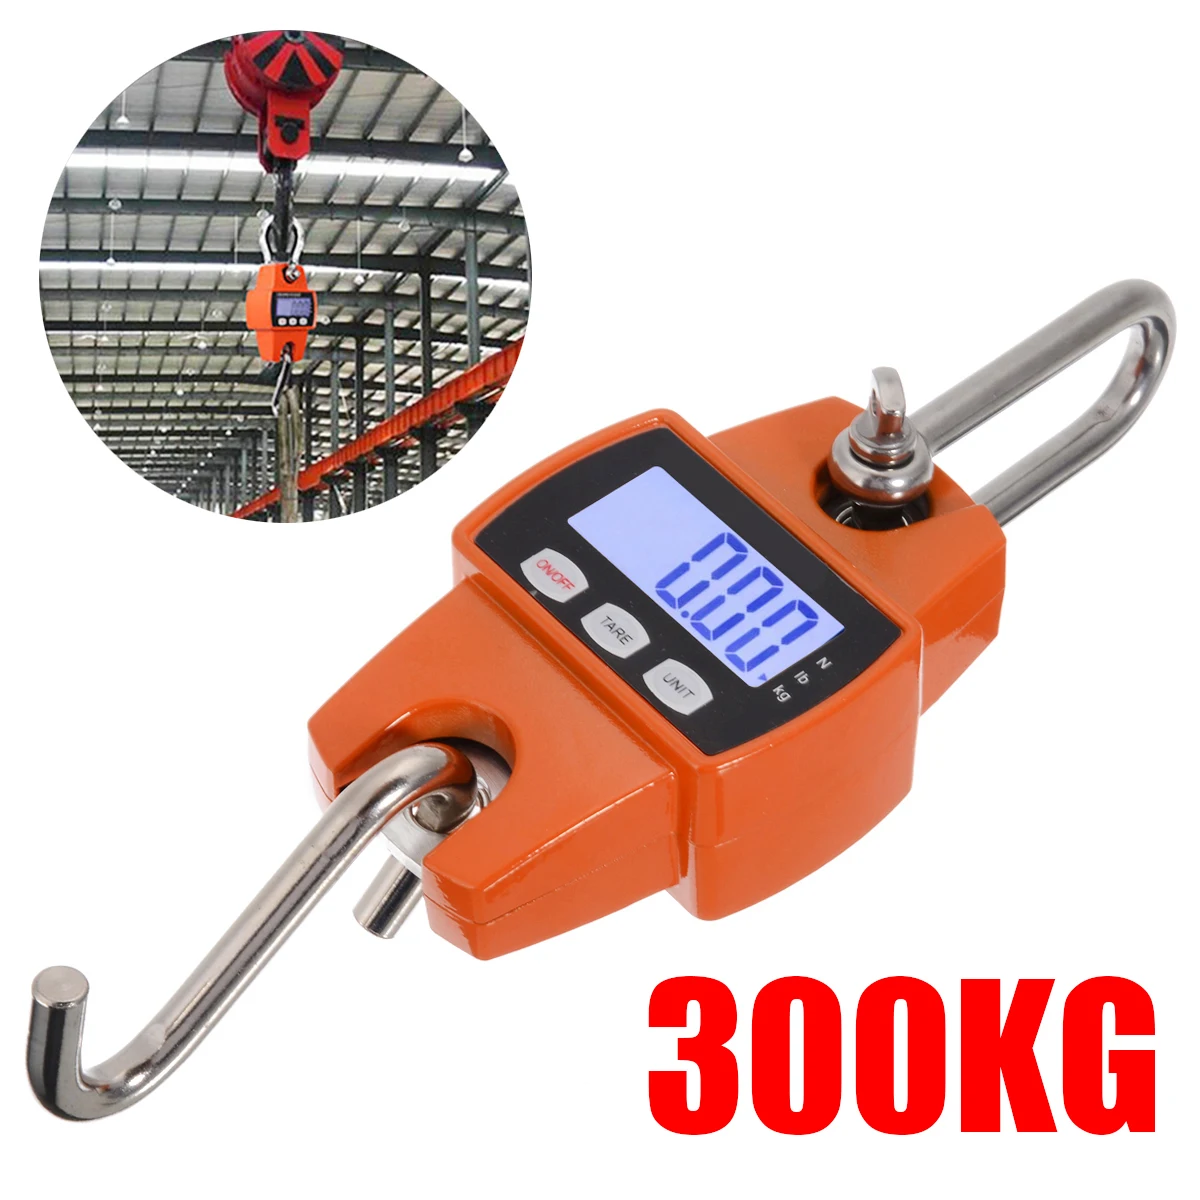 Enshey Hanging Scale 300KG/660LBS Digital Industrial Crane Scale High Precision Stainless Smart Weight Measuring Tool with LCD Display 